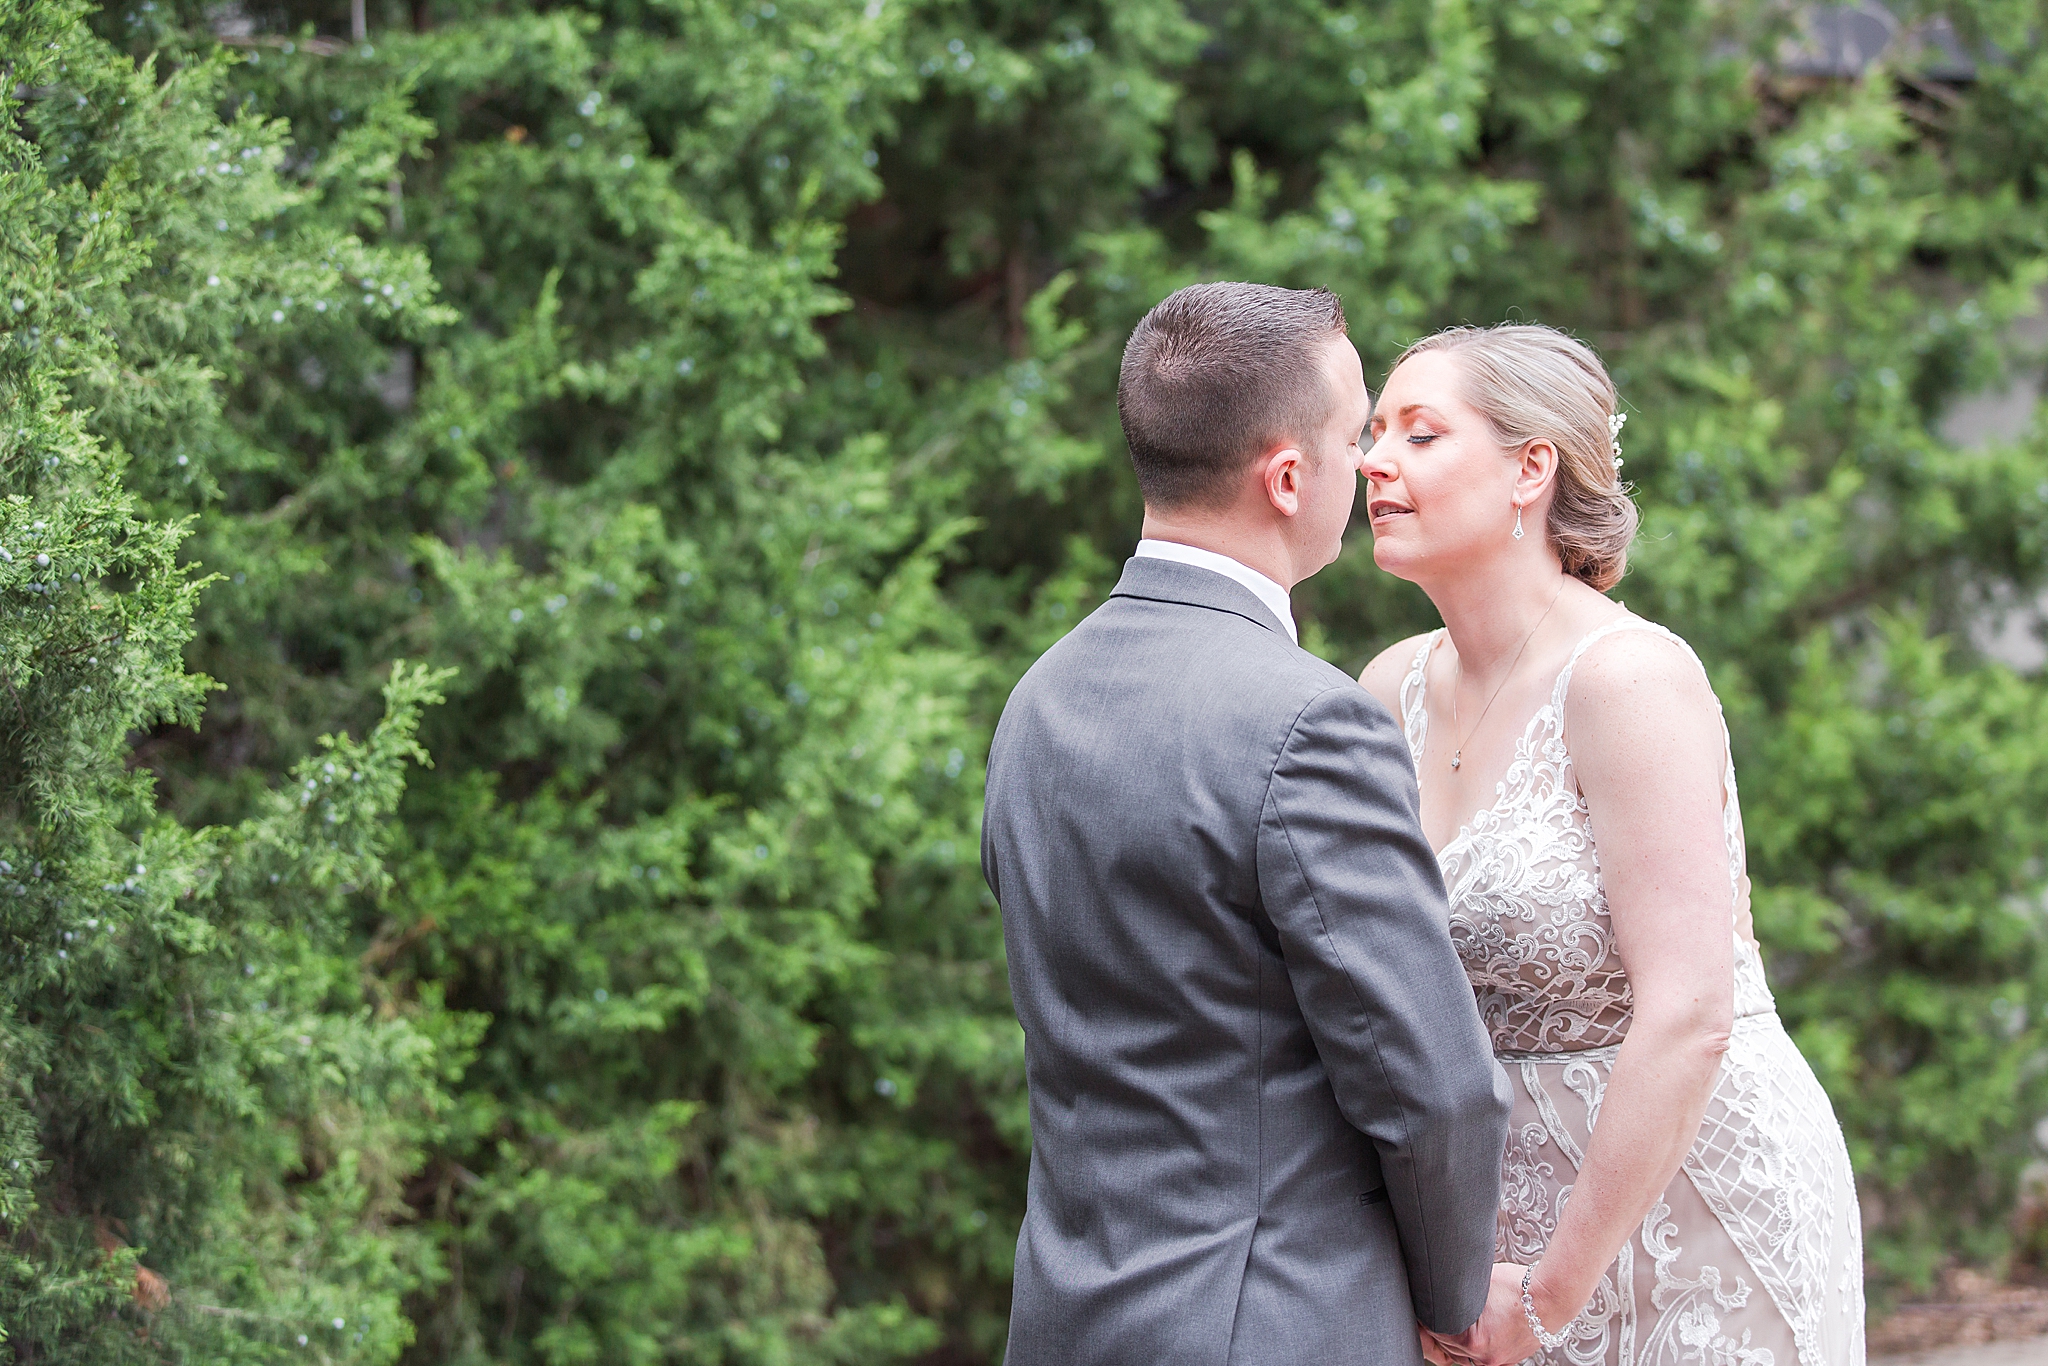 modern-romantic-wedding-photography-at-webers-in-ann-arbor-michigan-by-courtney-carolyn-photography_0023.jpg